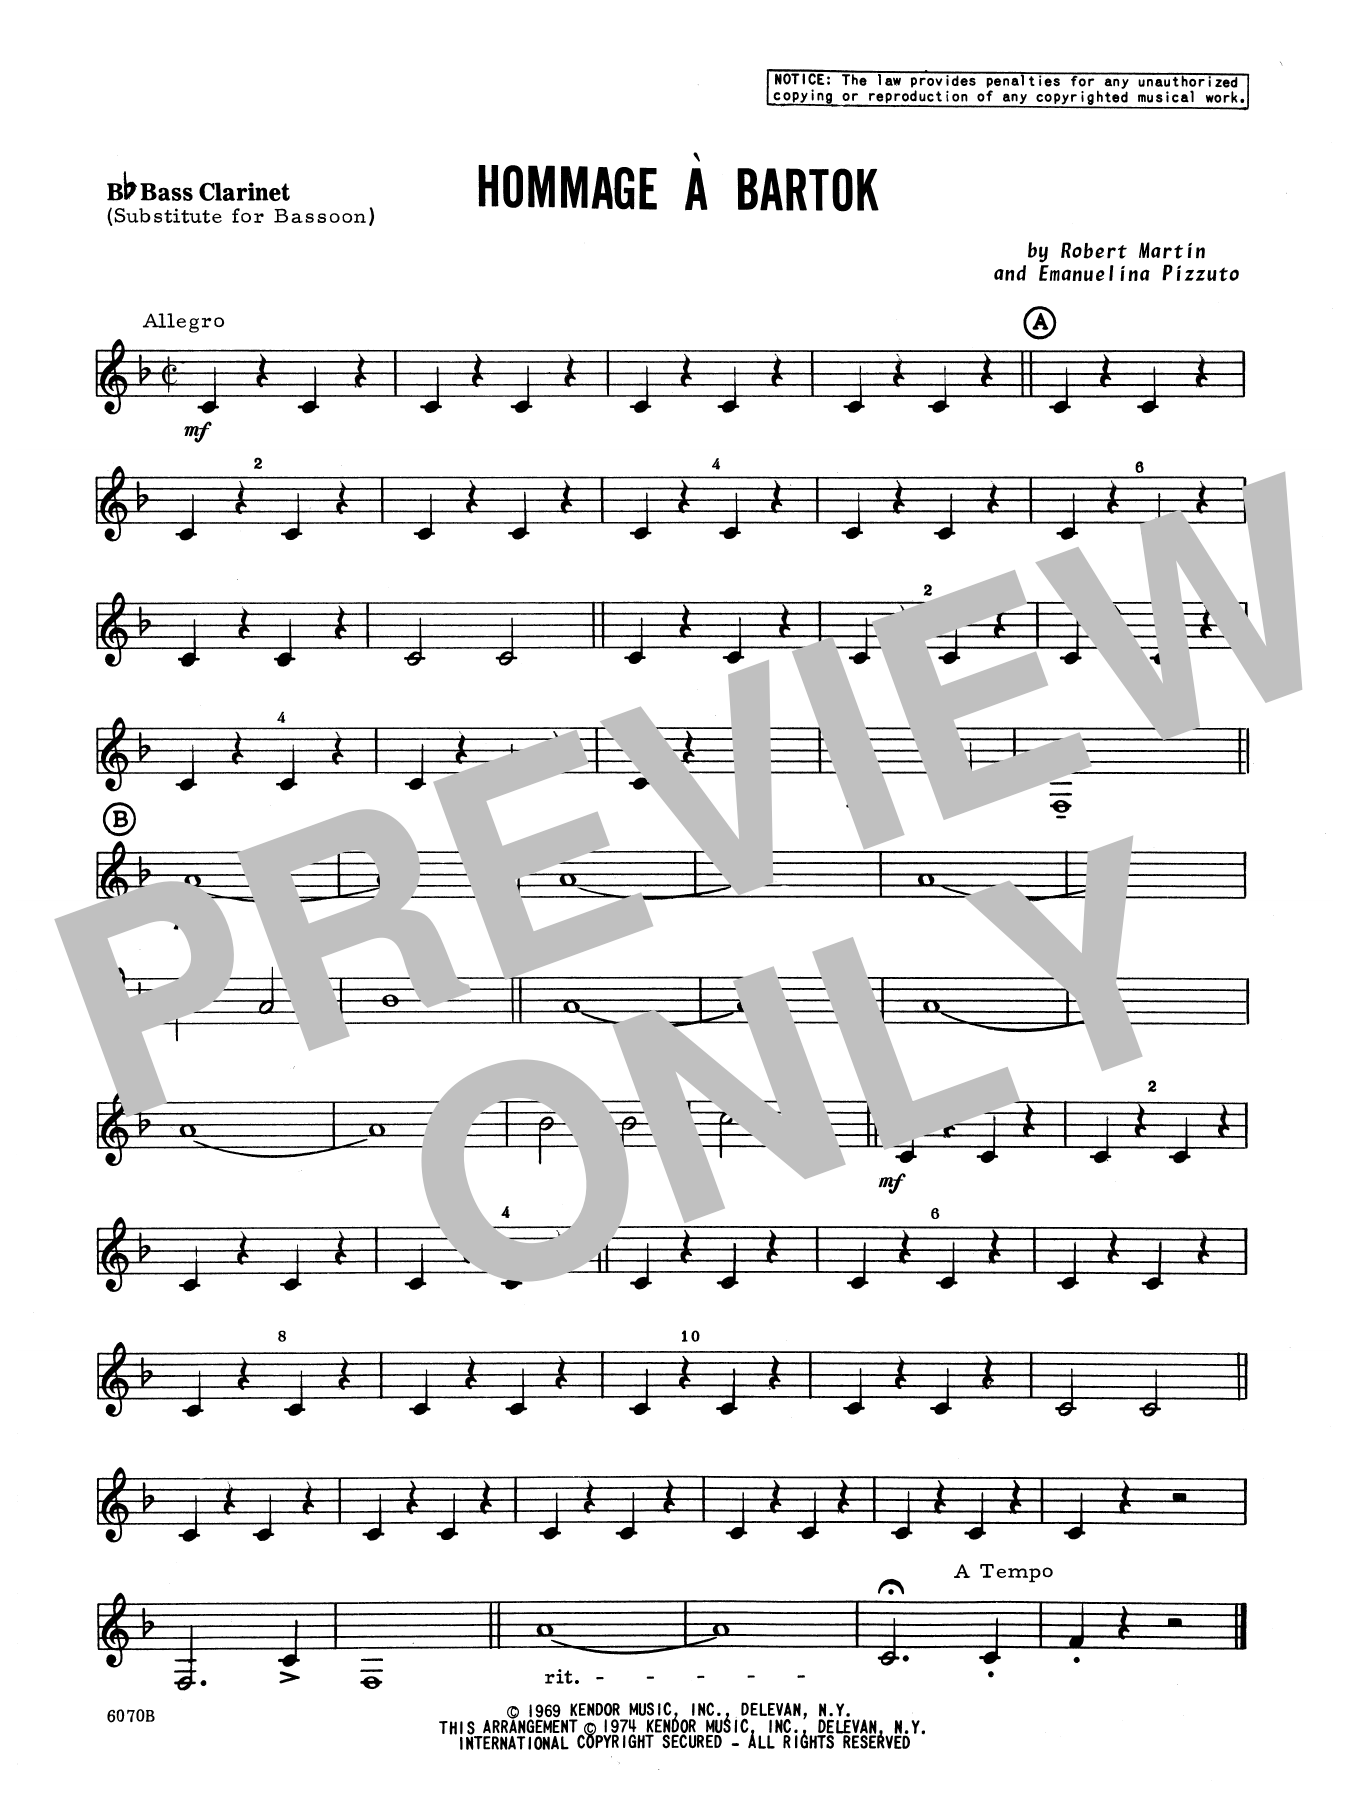 Martin Hommage A Bartok - Opt. Bass Clarinet sheet music notes and chords. Download Printable PDF.